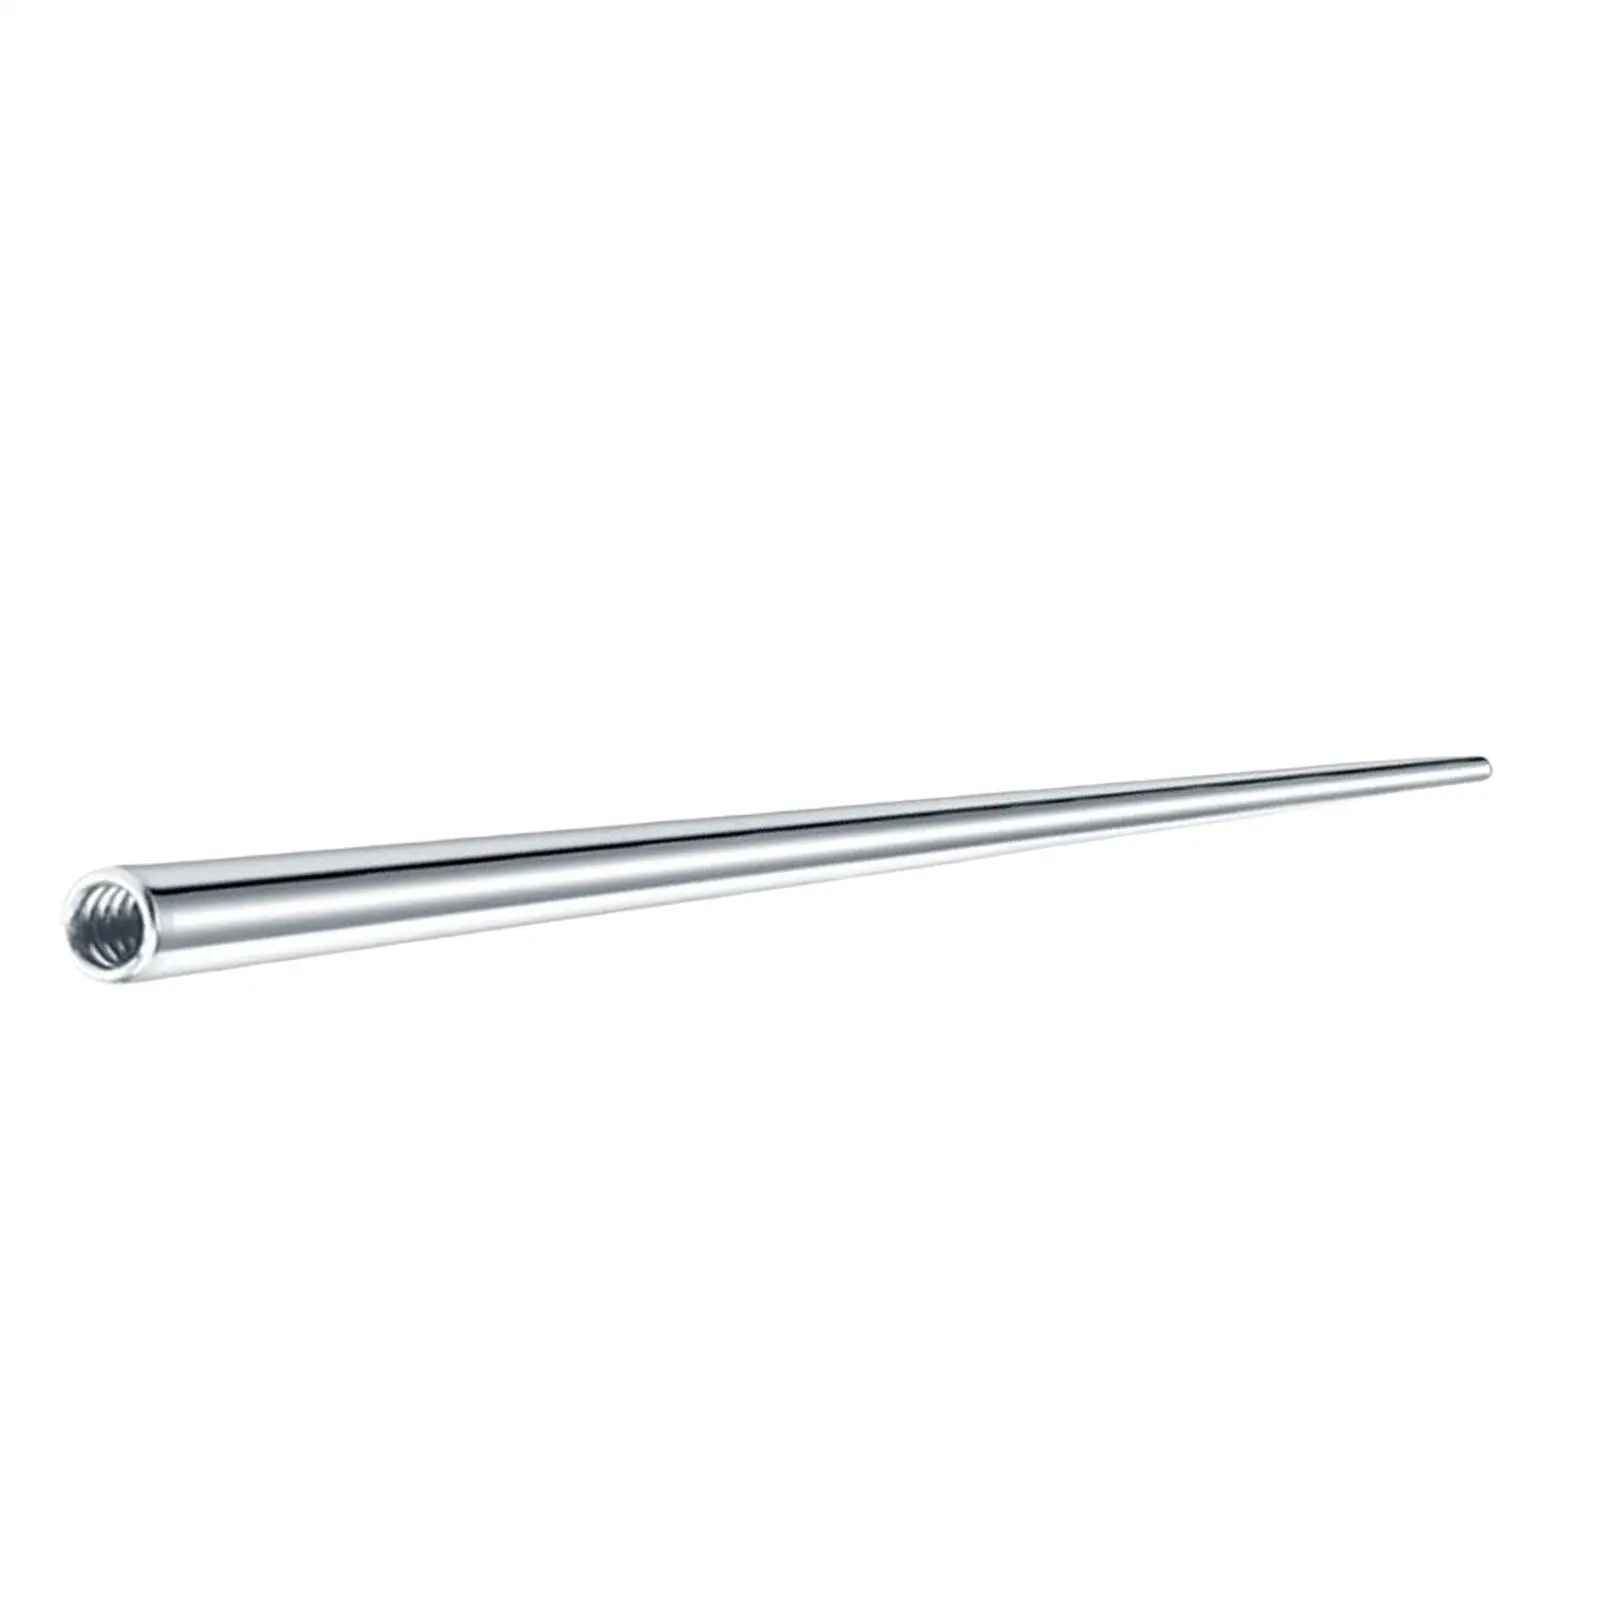 Threaded Taper Piercing Tool Threaded Pin Taper Stainless Steel 1.18inch Length